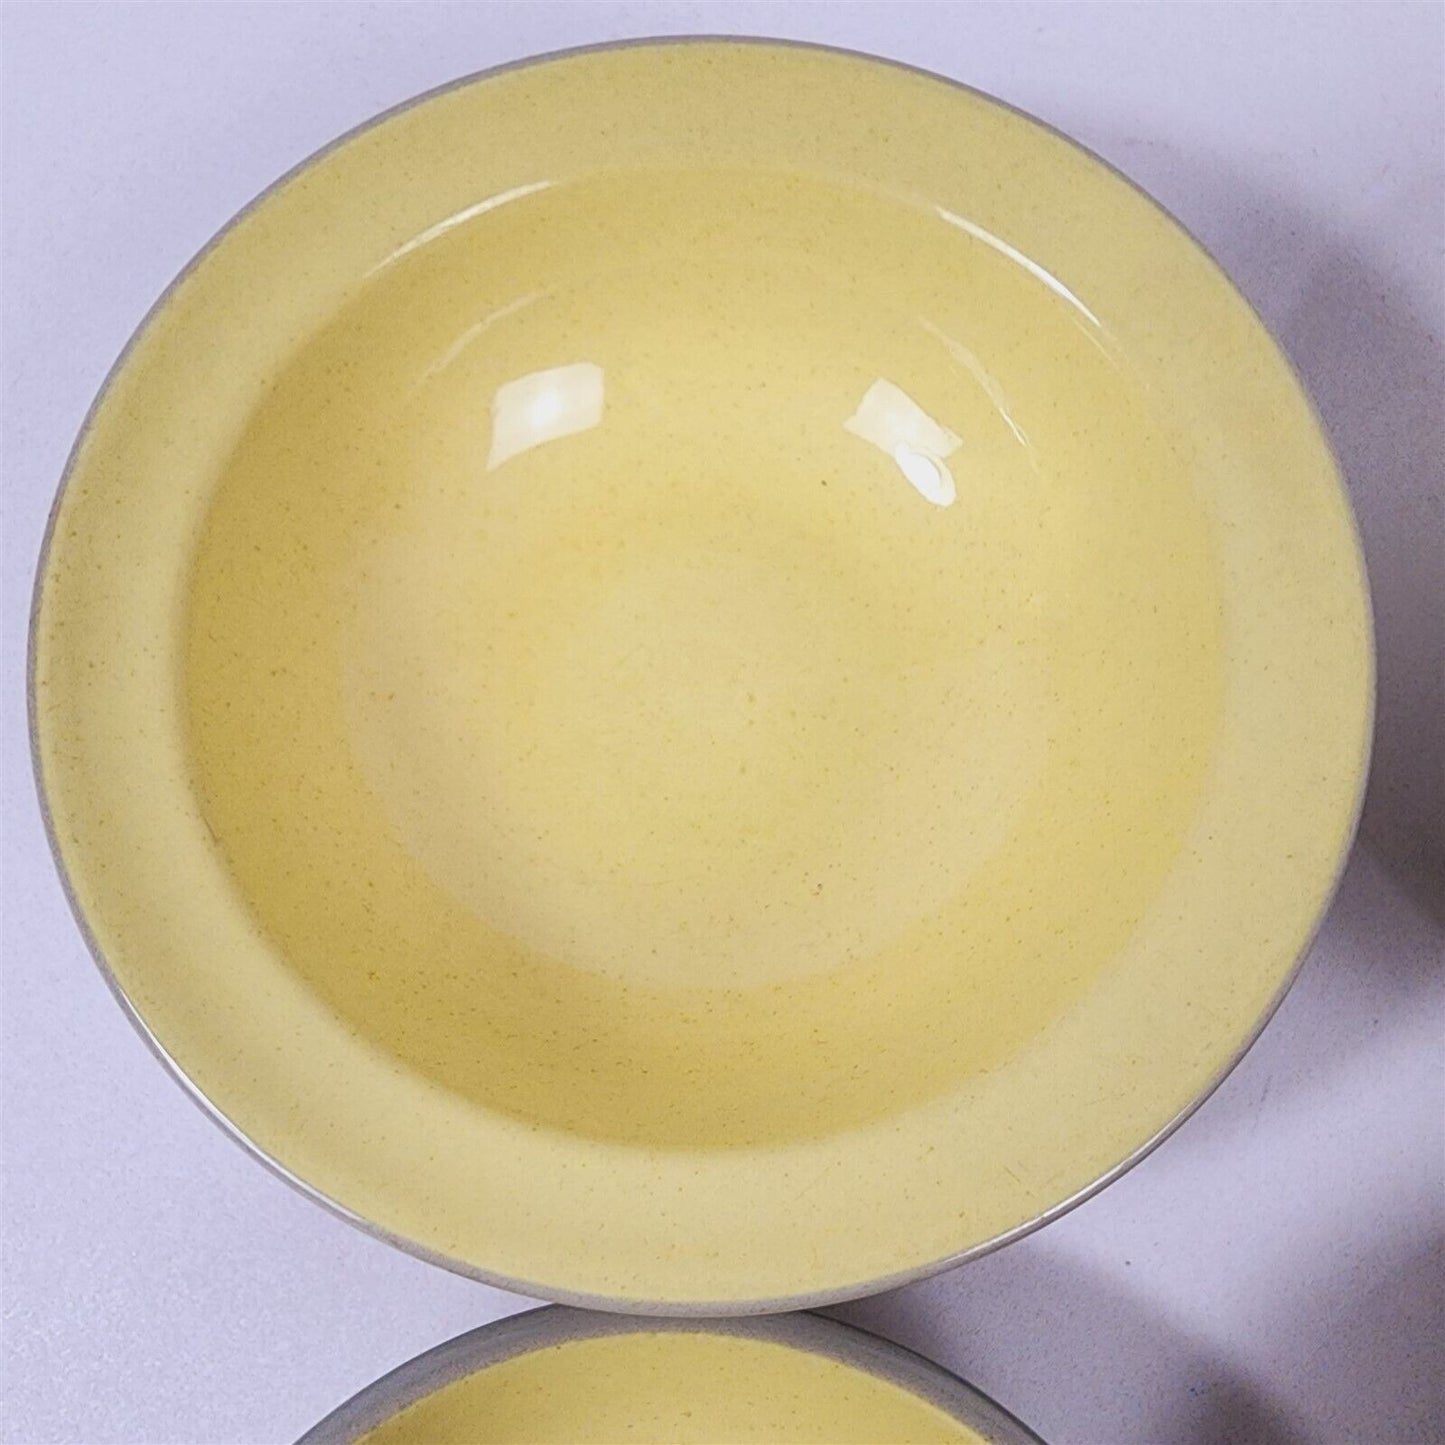 4 Pcs Vintage Harkerware Stoneware Speckled Yellow Gray Cereal Berry Bowl Saucer